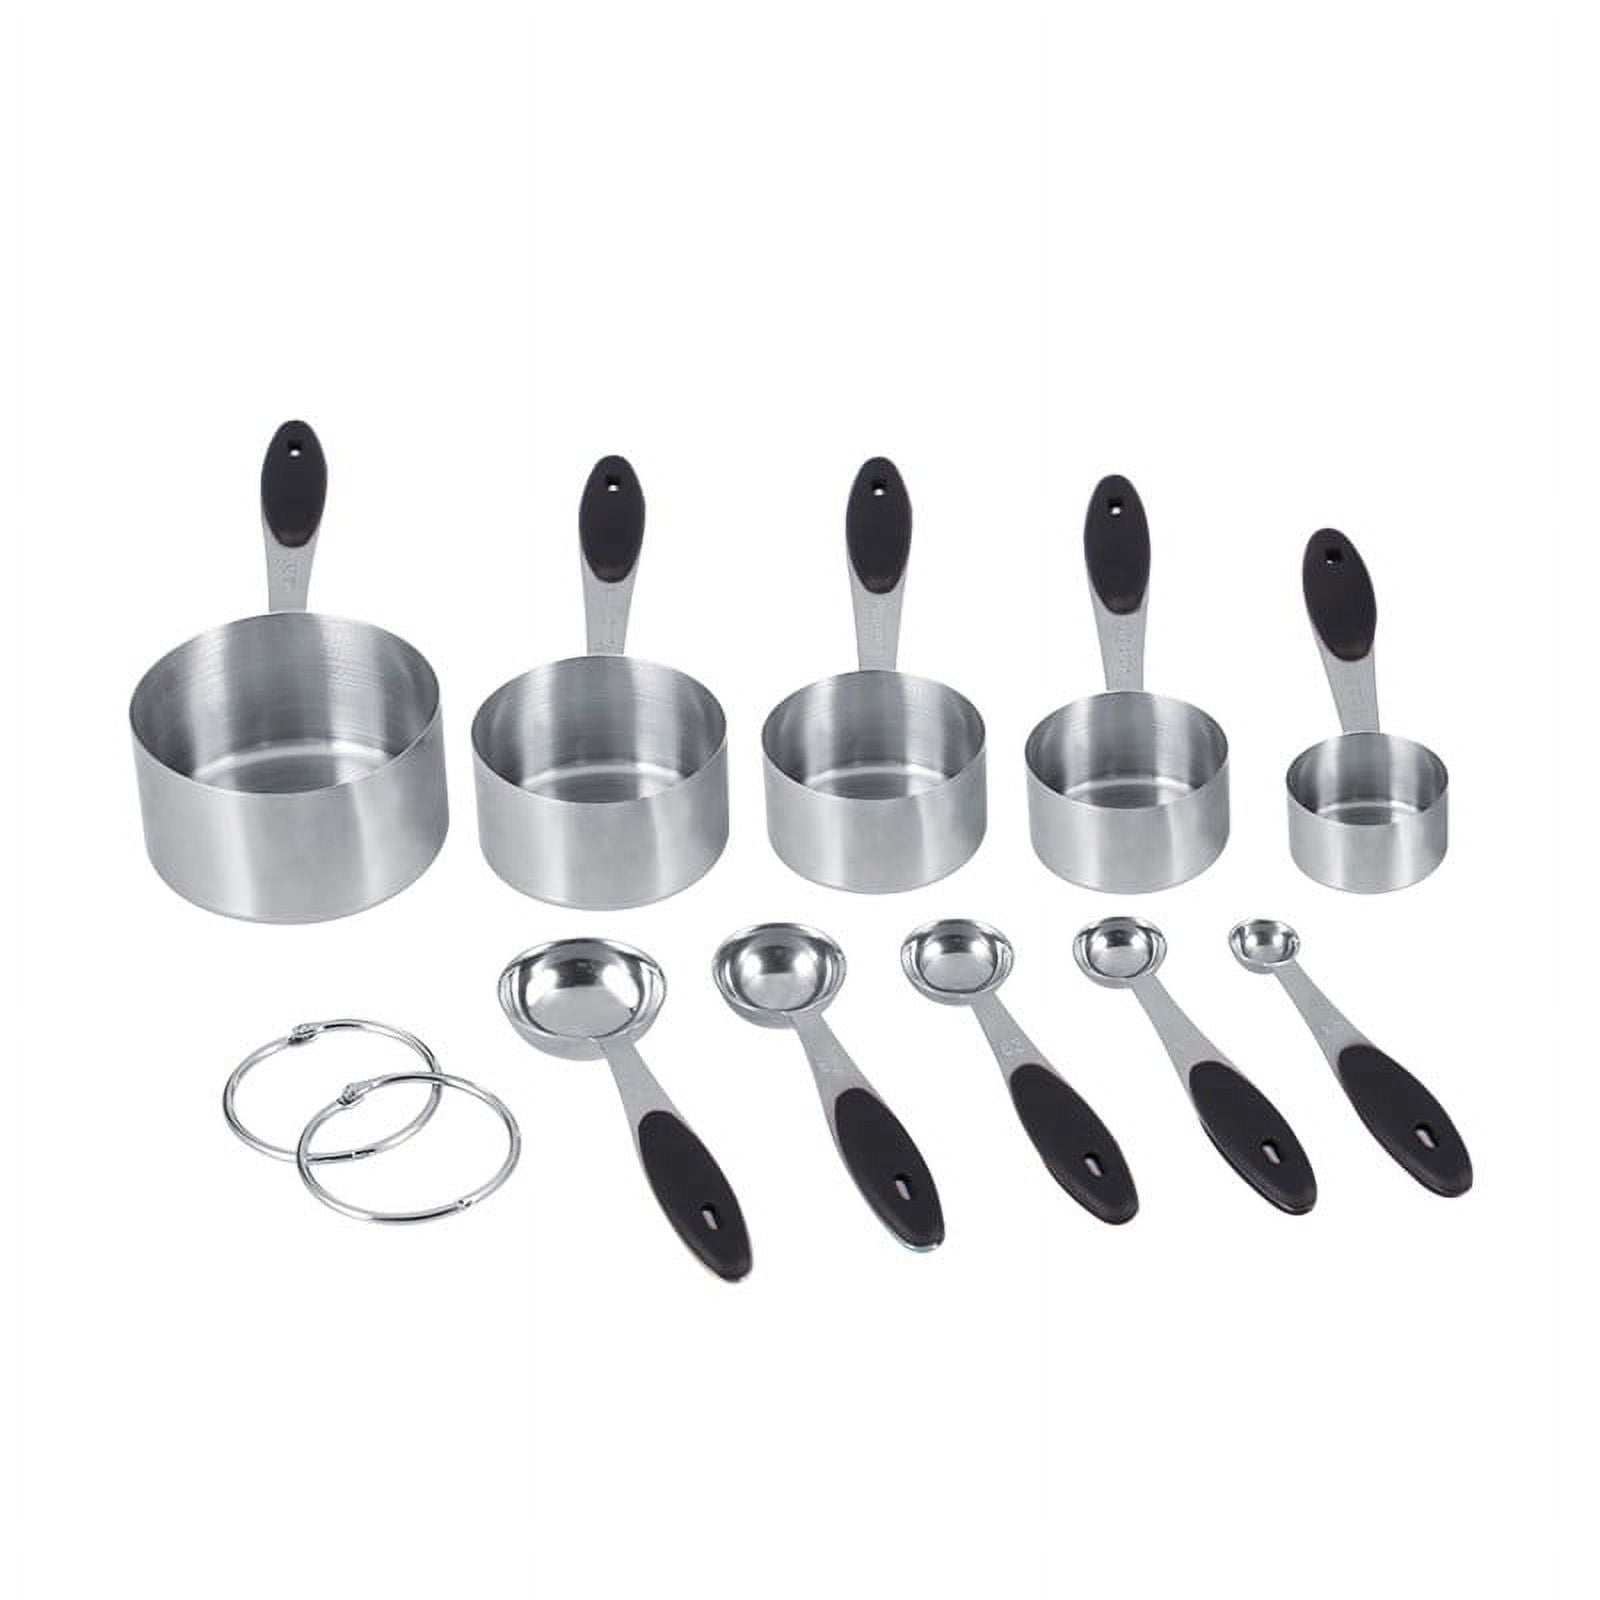 VOJACO Measuring Cups and Measuring Spoons, Measuring Cups and Spoons Set  of 10 Pieces, Stainless Steel Measuring Cup Set for Dry Liquid Food, Metal  Measure Cup…